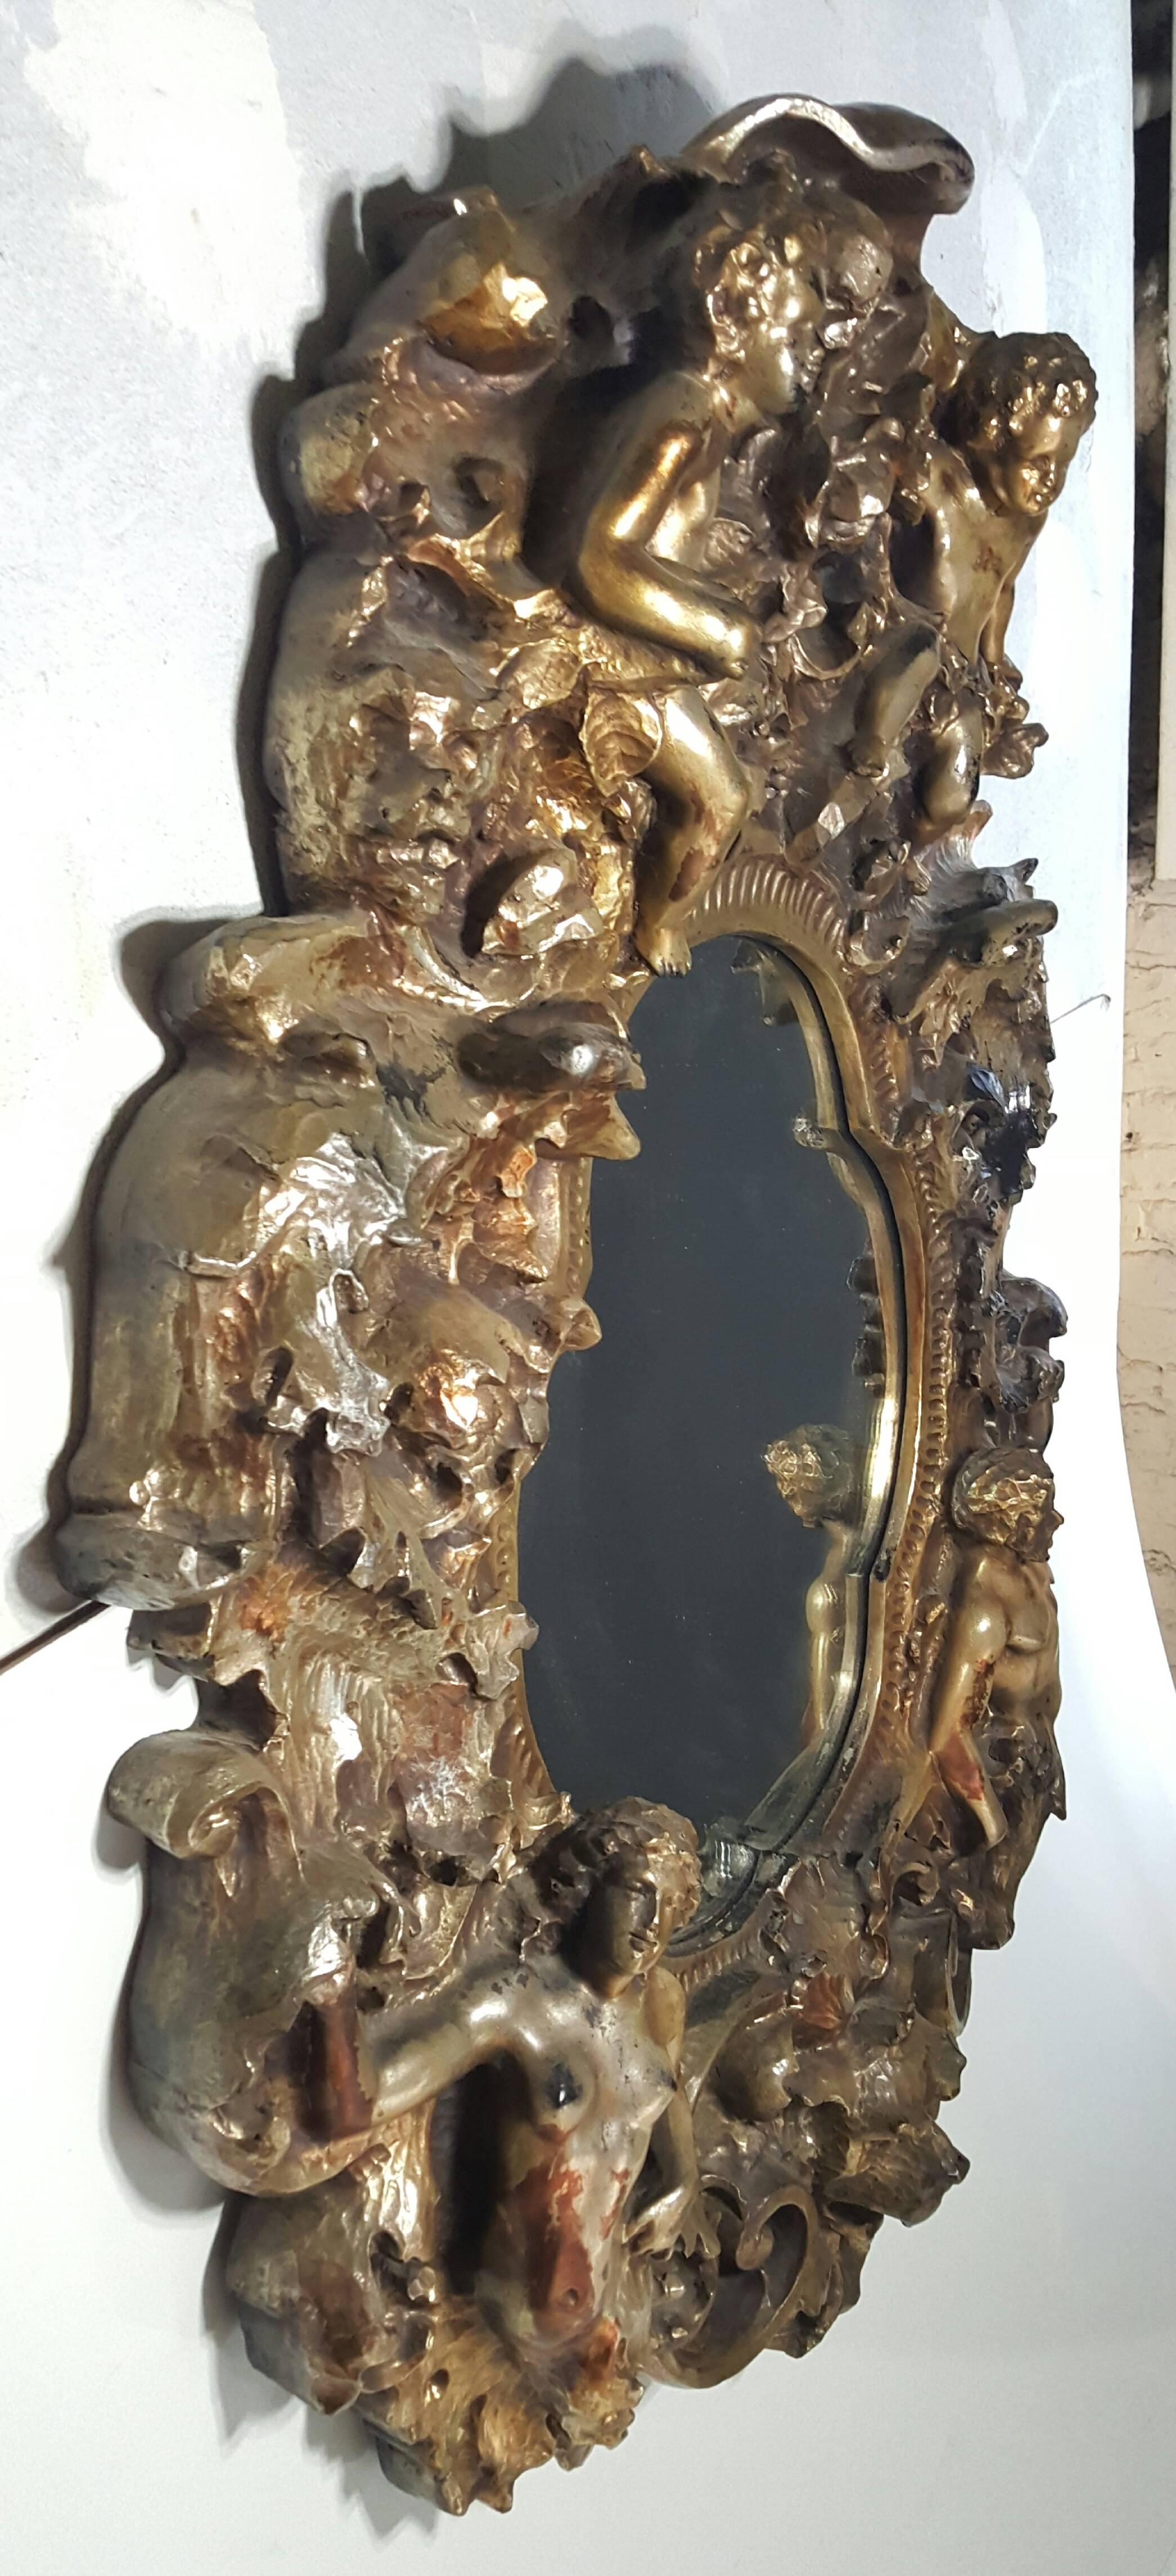 Large sculptural fiberglass and resin fantasy wall mirror made by Finesse Originals featuring angels, centaur and dog motif. Large-scale, minor damage to angel ear.